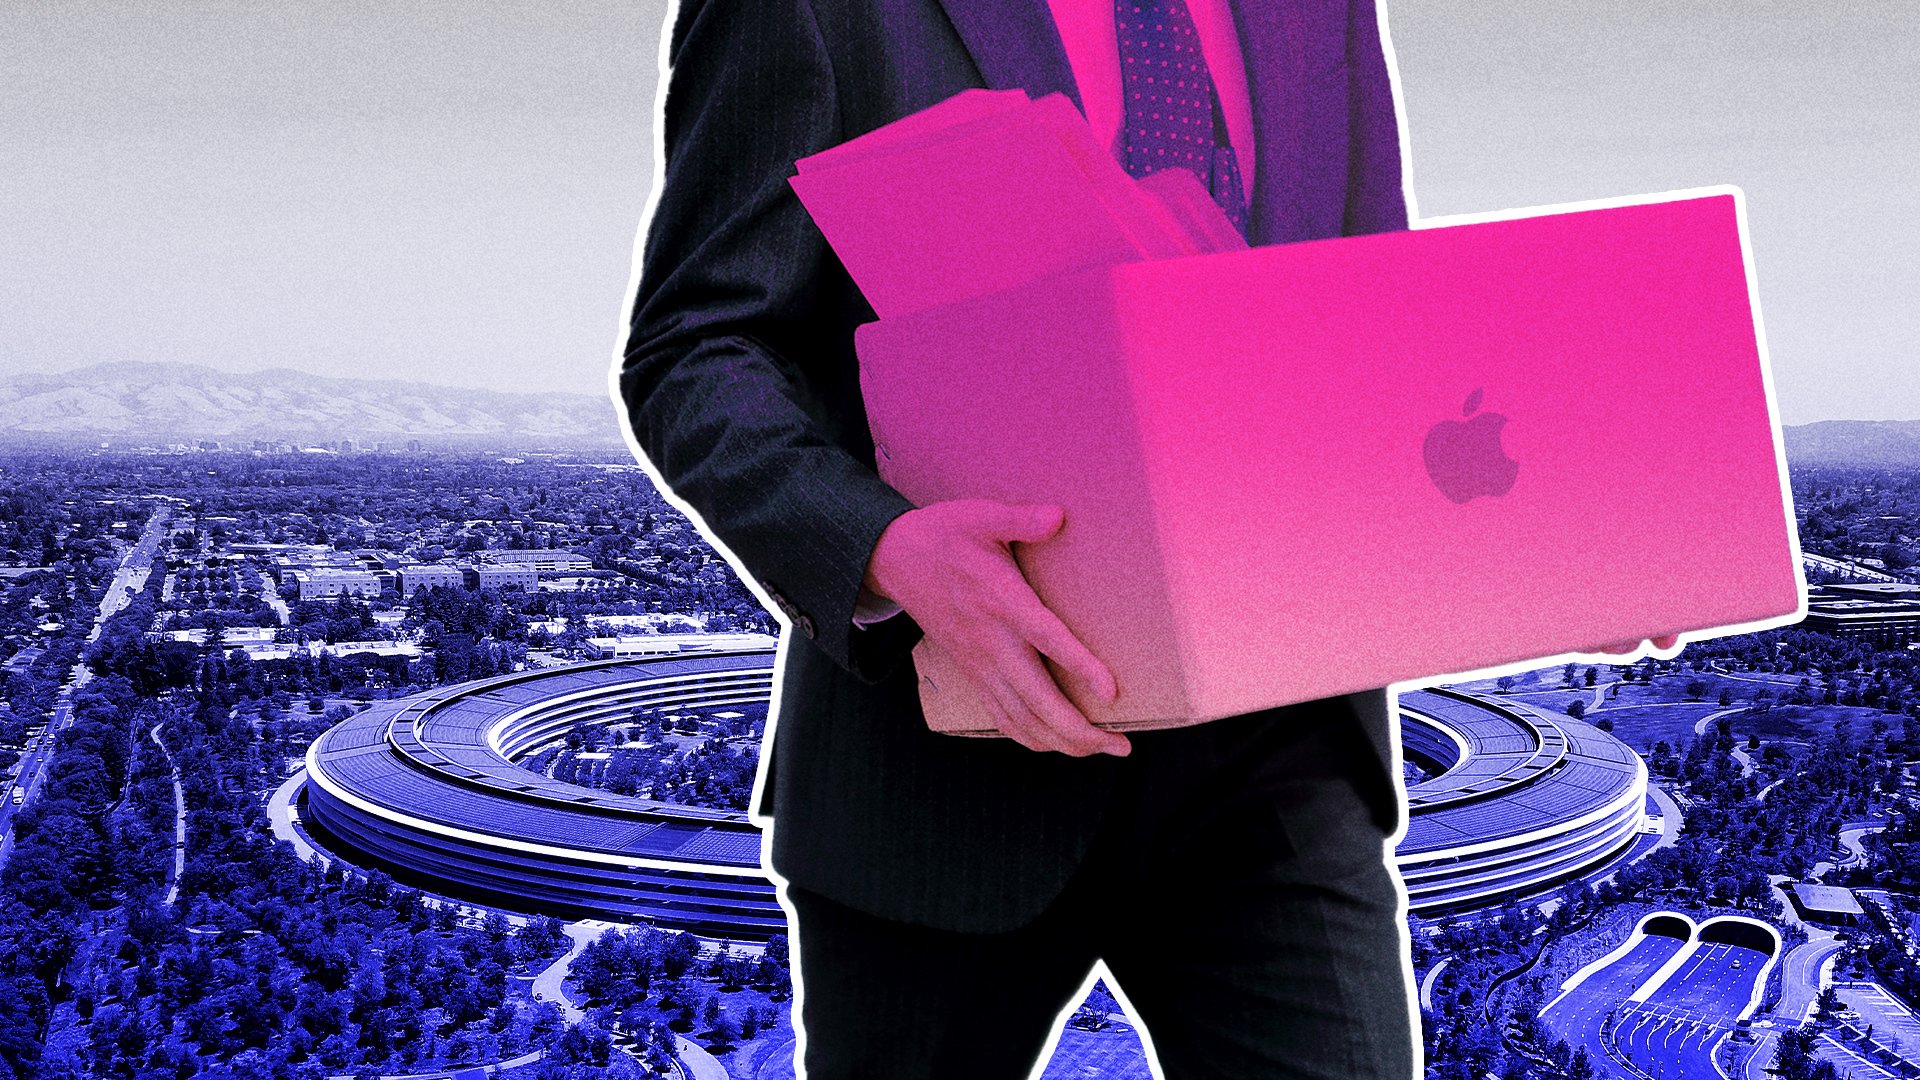 Apple exec now has a lot more time on his hands to ‘fondle big-breasted women’